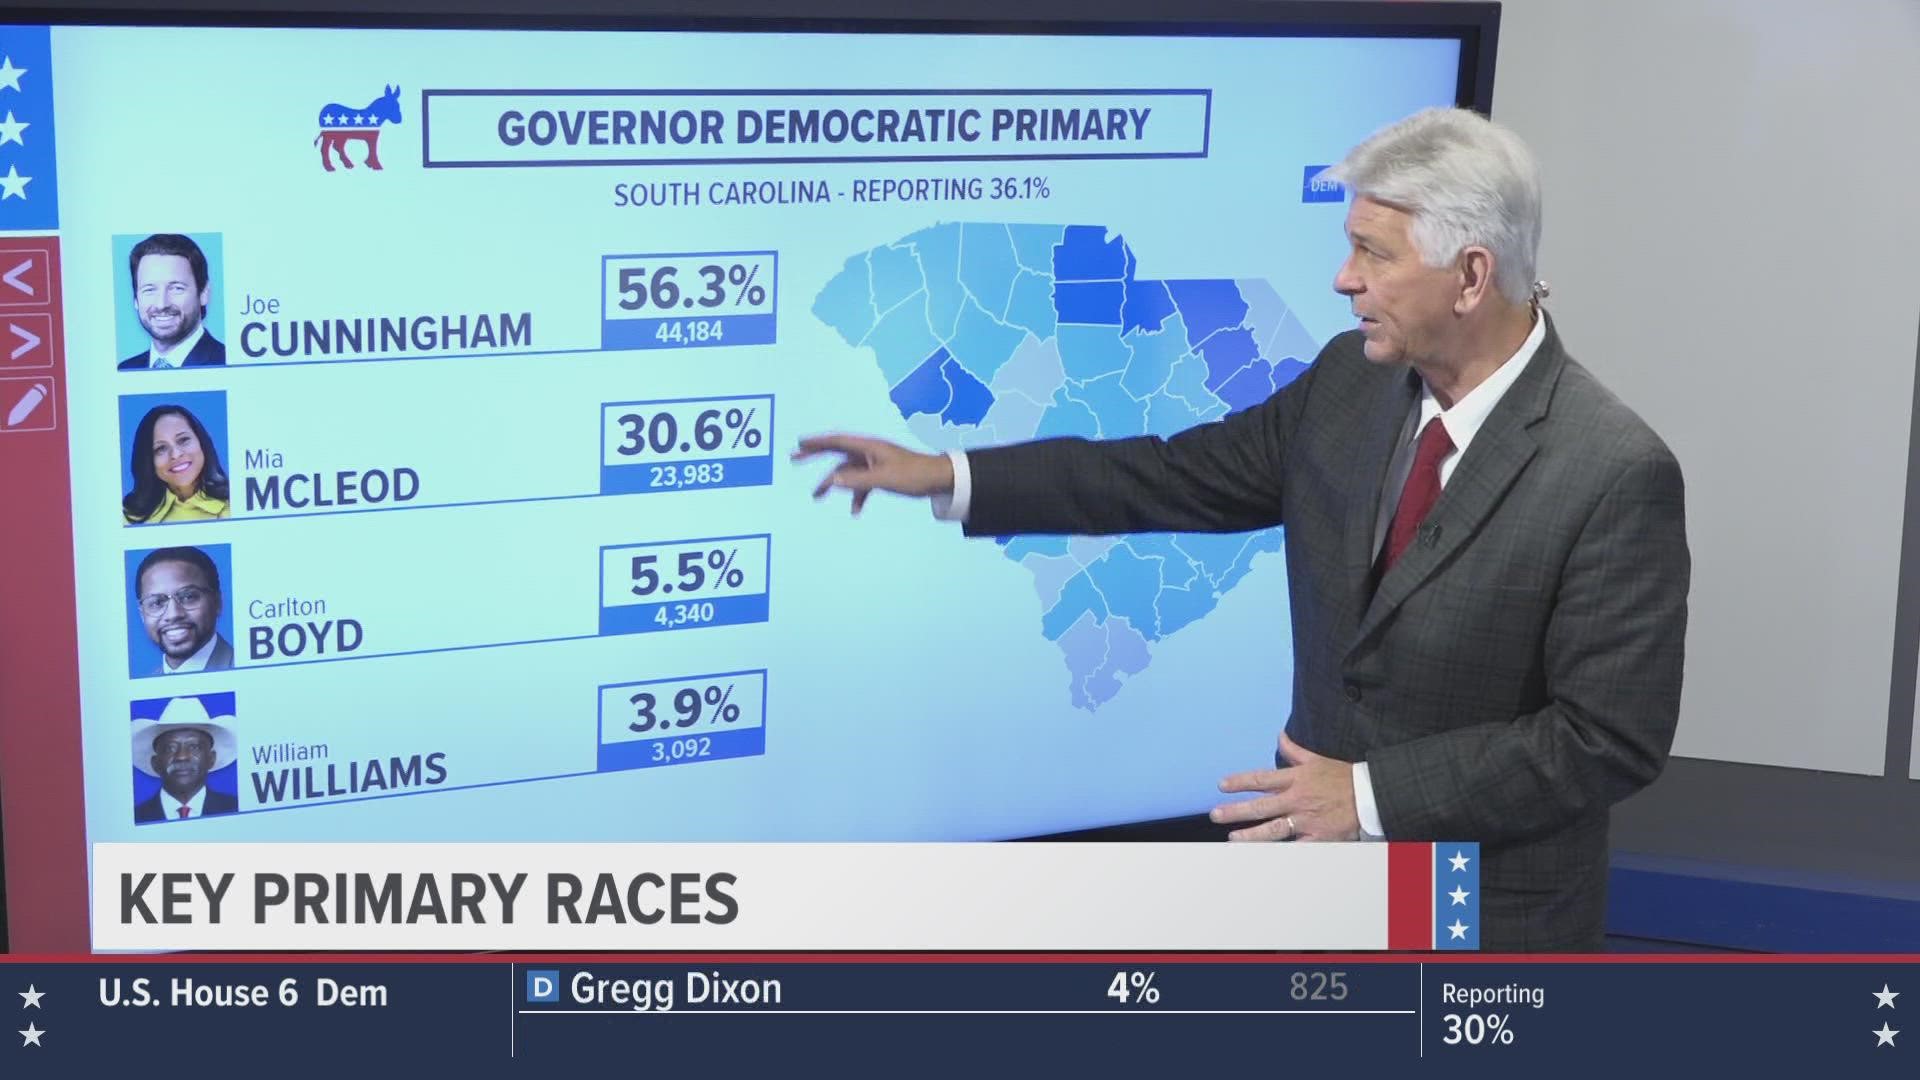 WLTX takes a look at the races and whats been called so far.